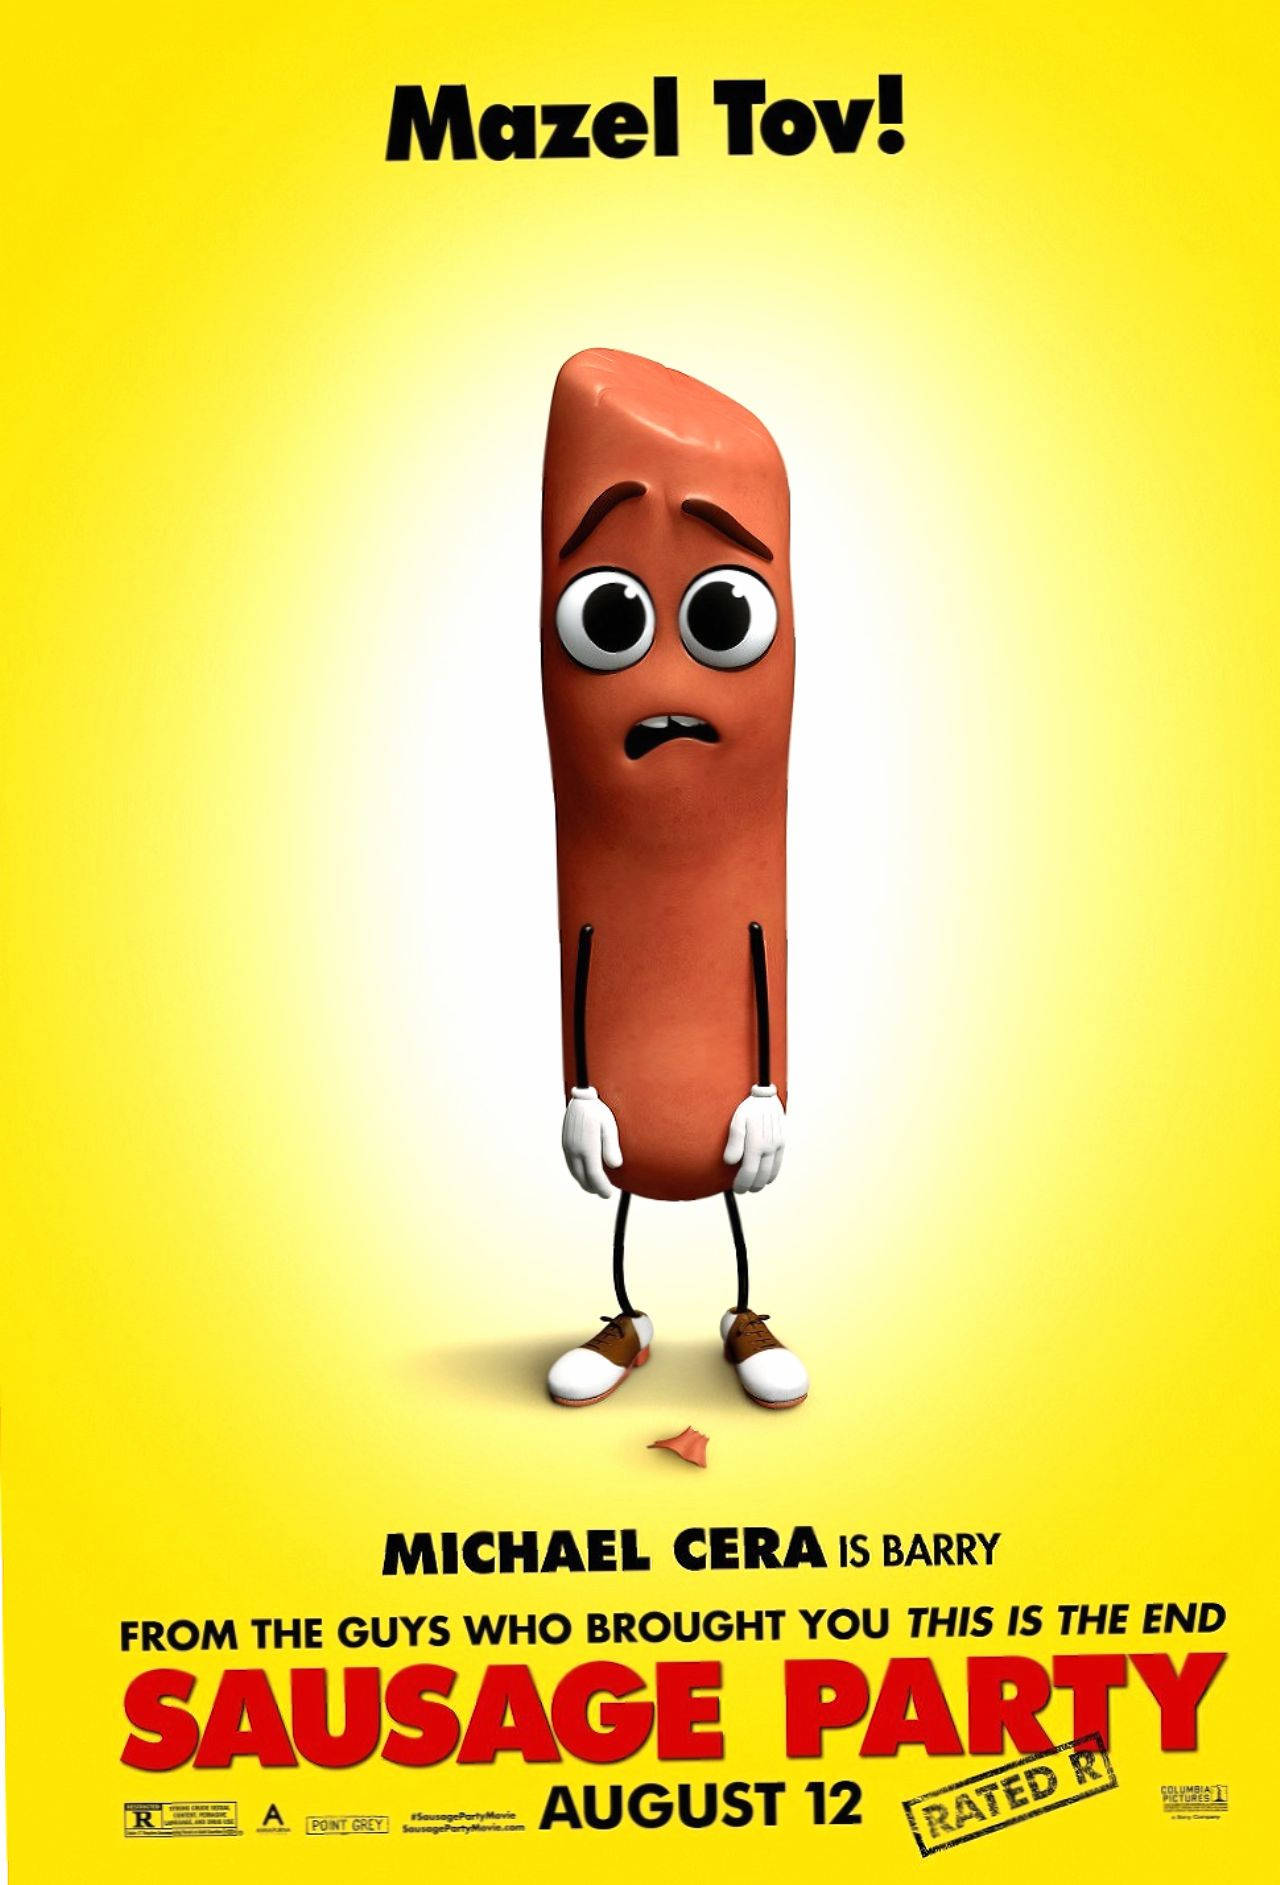 Barry Sausage Party Poster Background